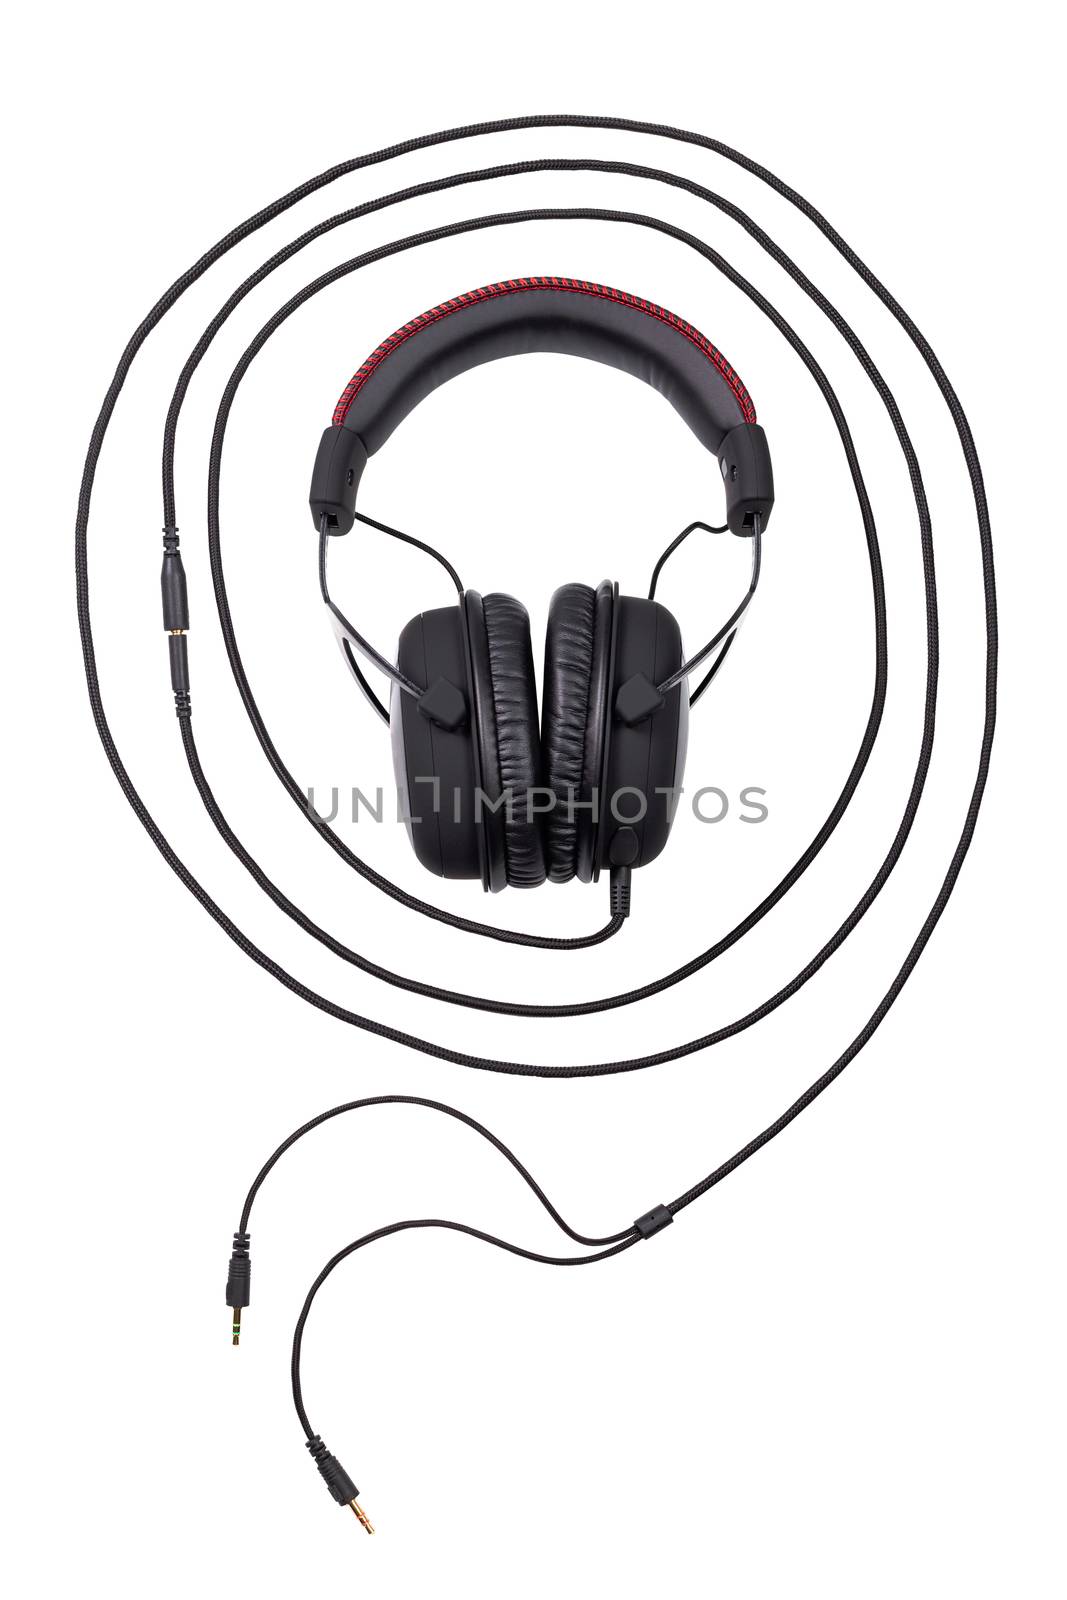 wired black gaming headset surrounded by it's wire's concentric circle - sound wave concept - isolated on white background in flat lay composition